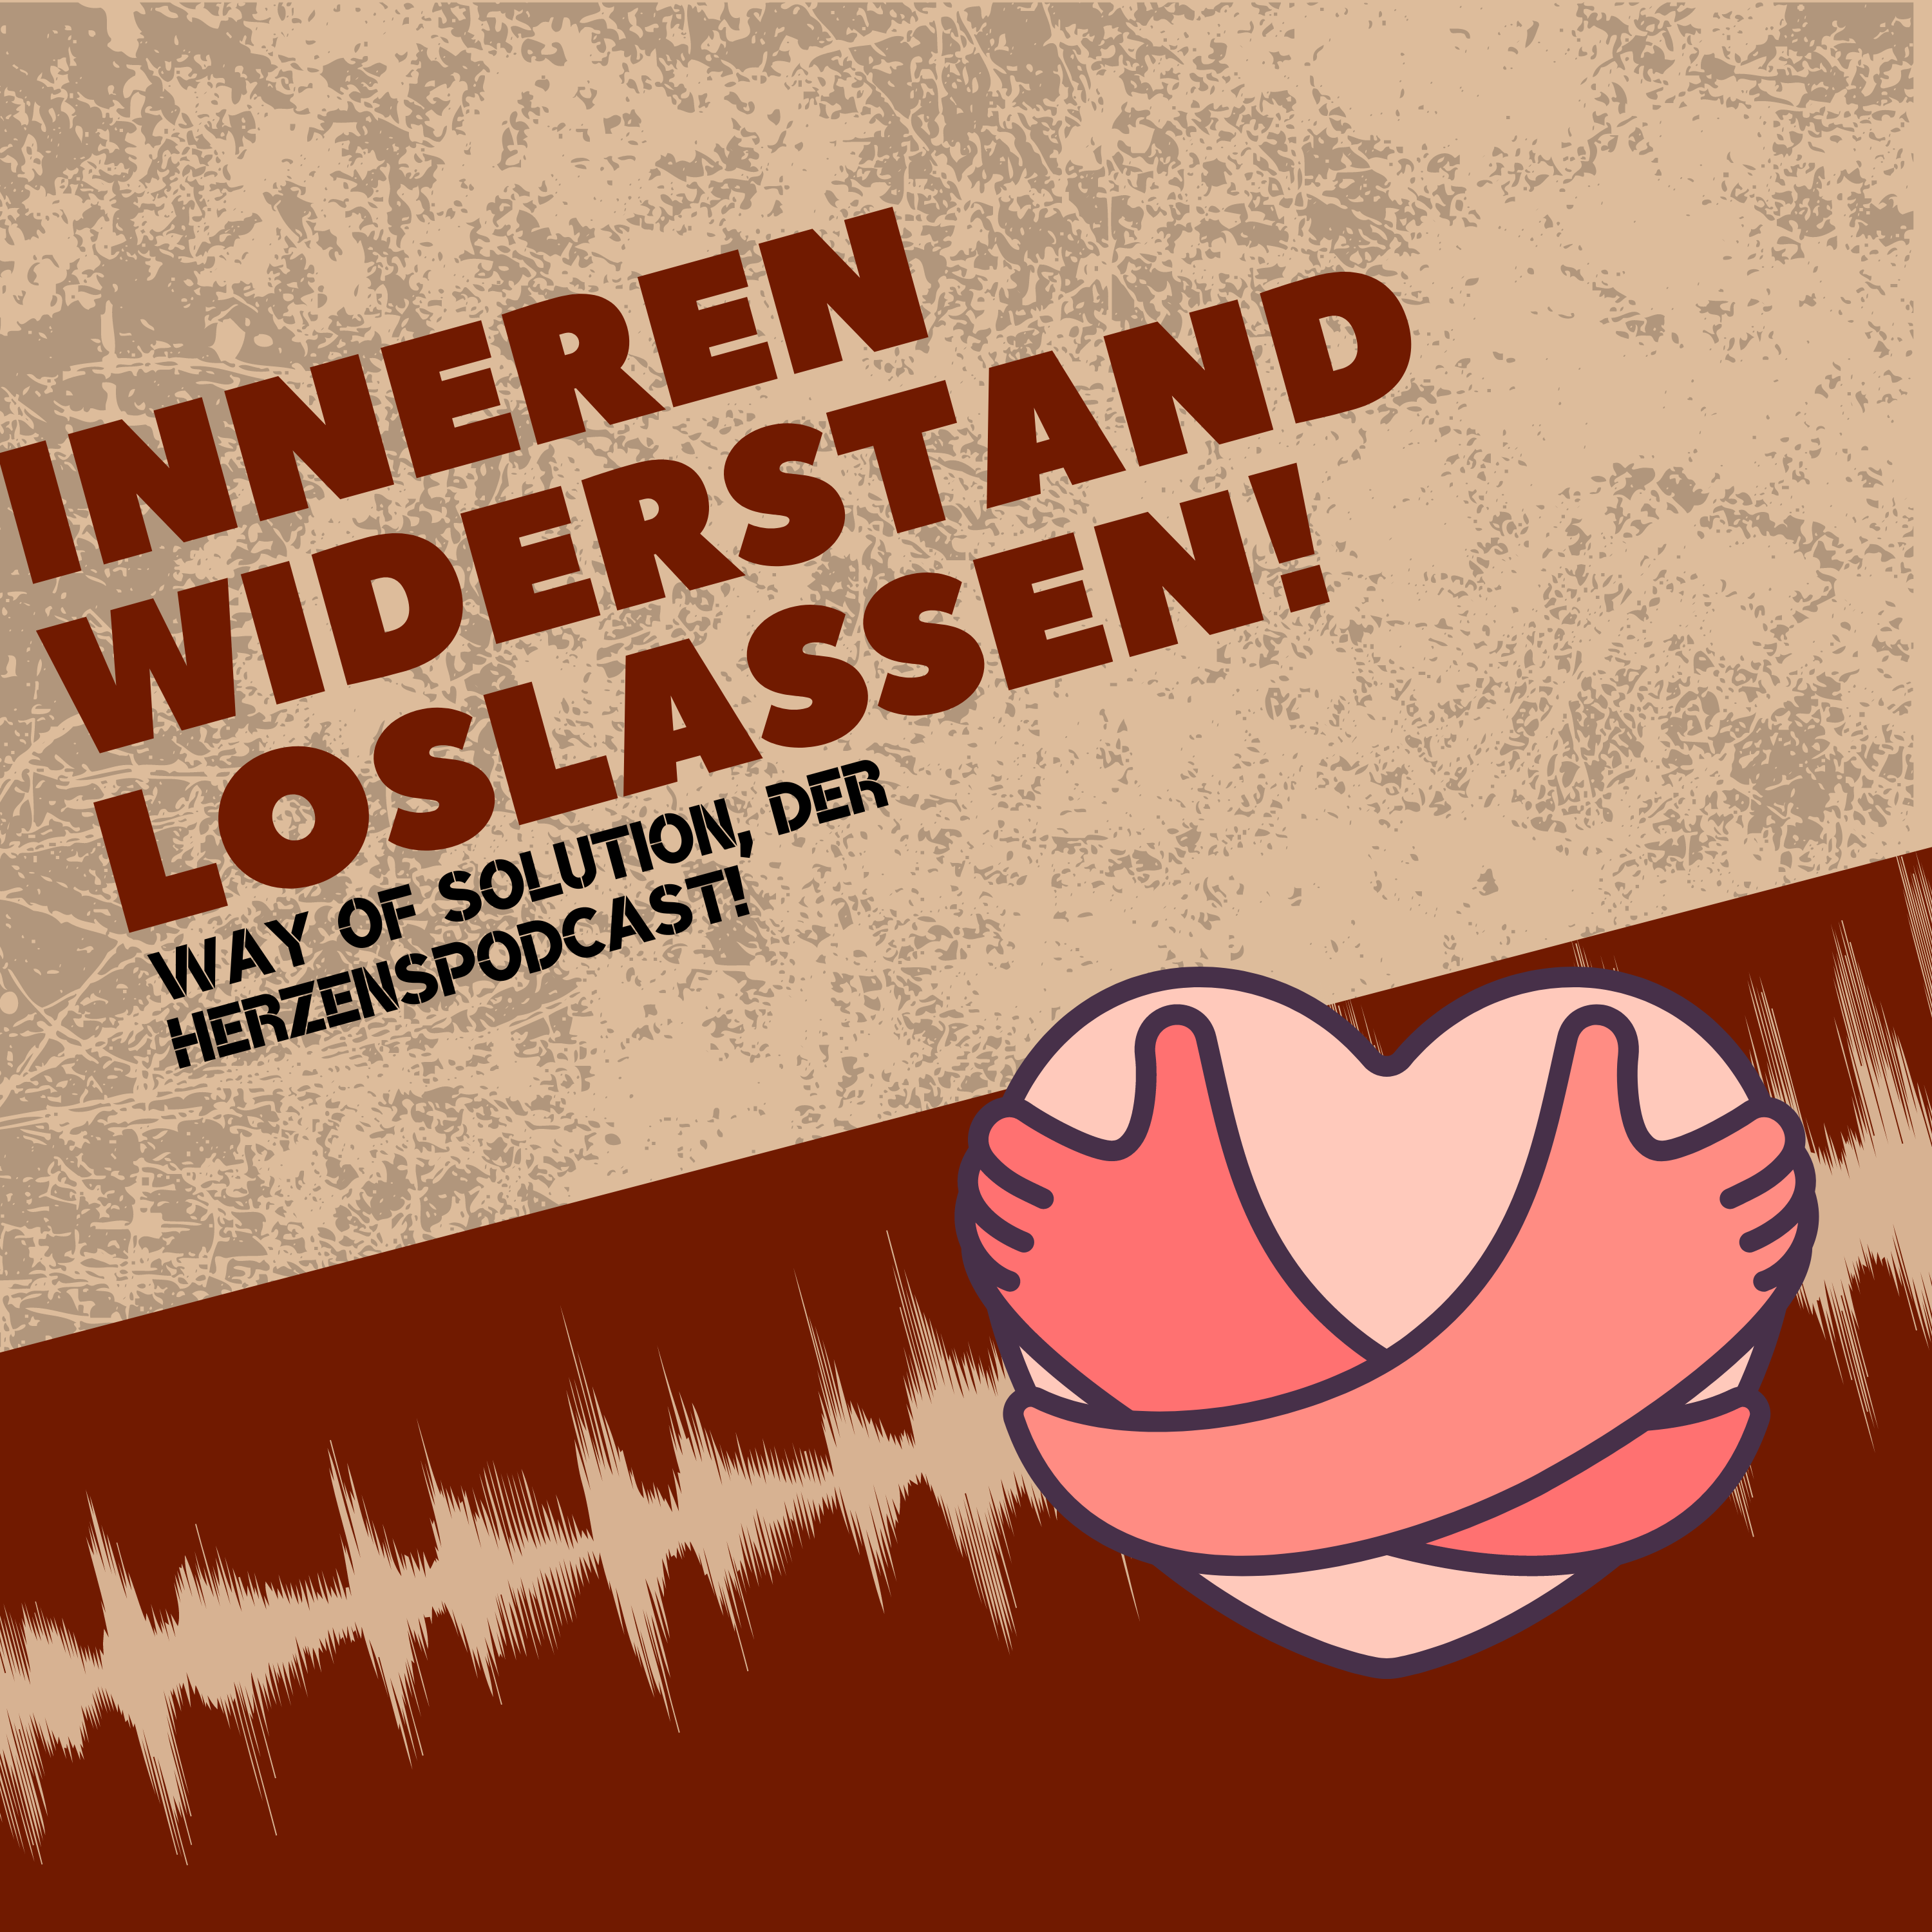 You are currently viewing Widerstand los lassen